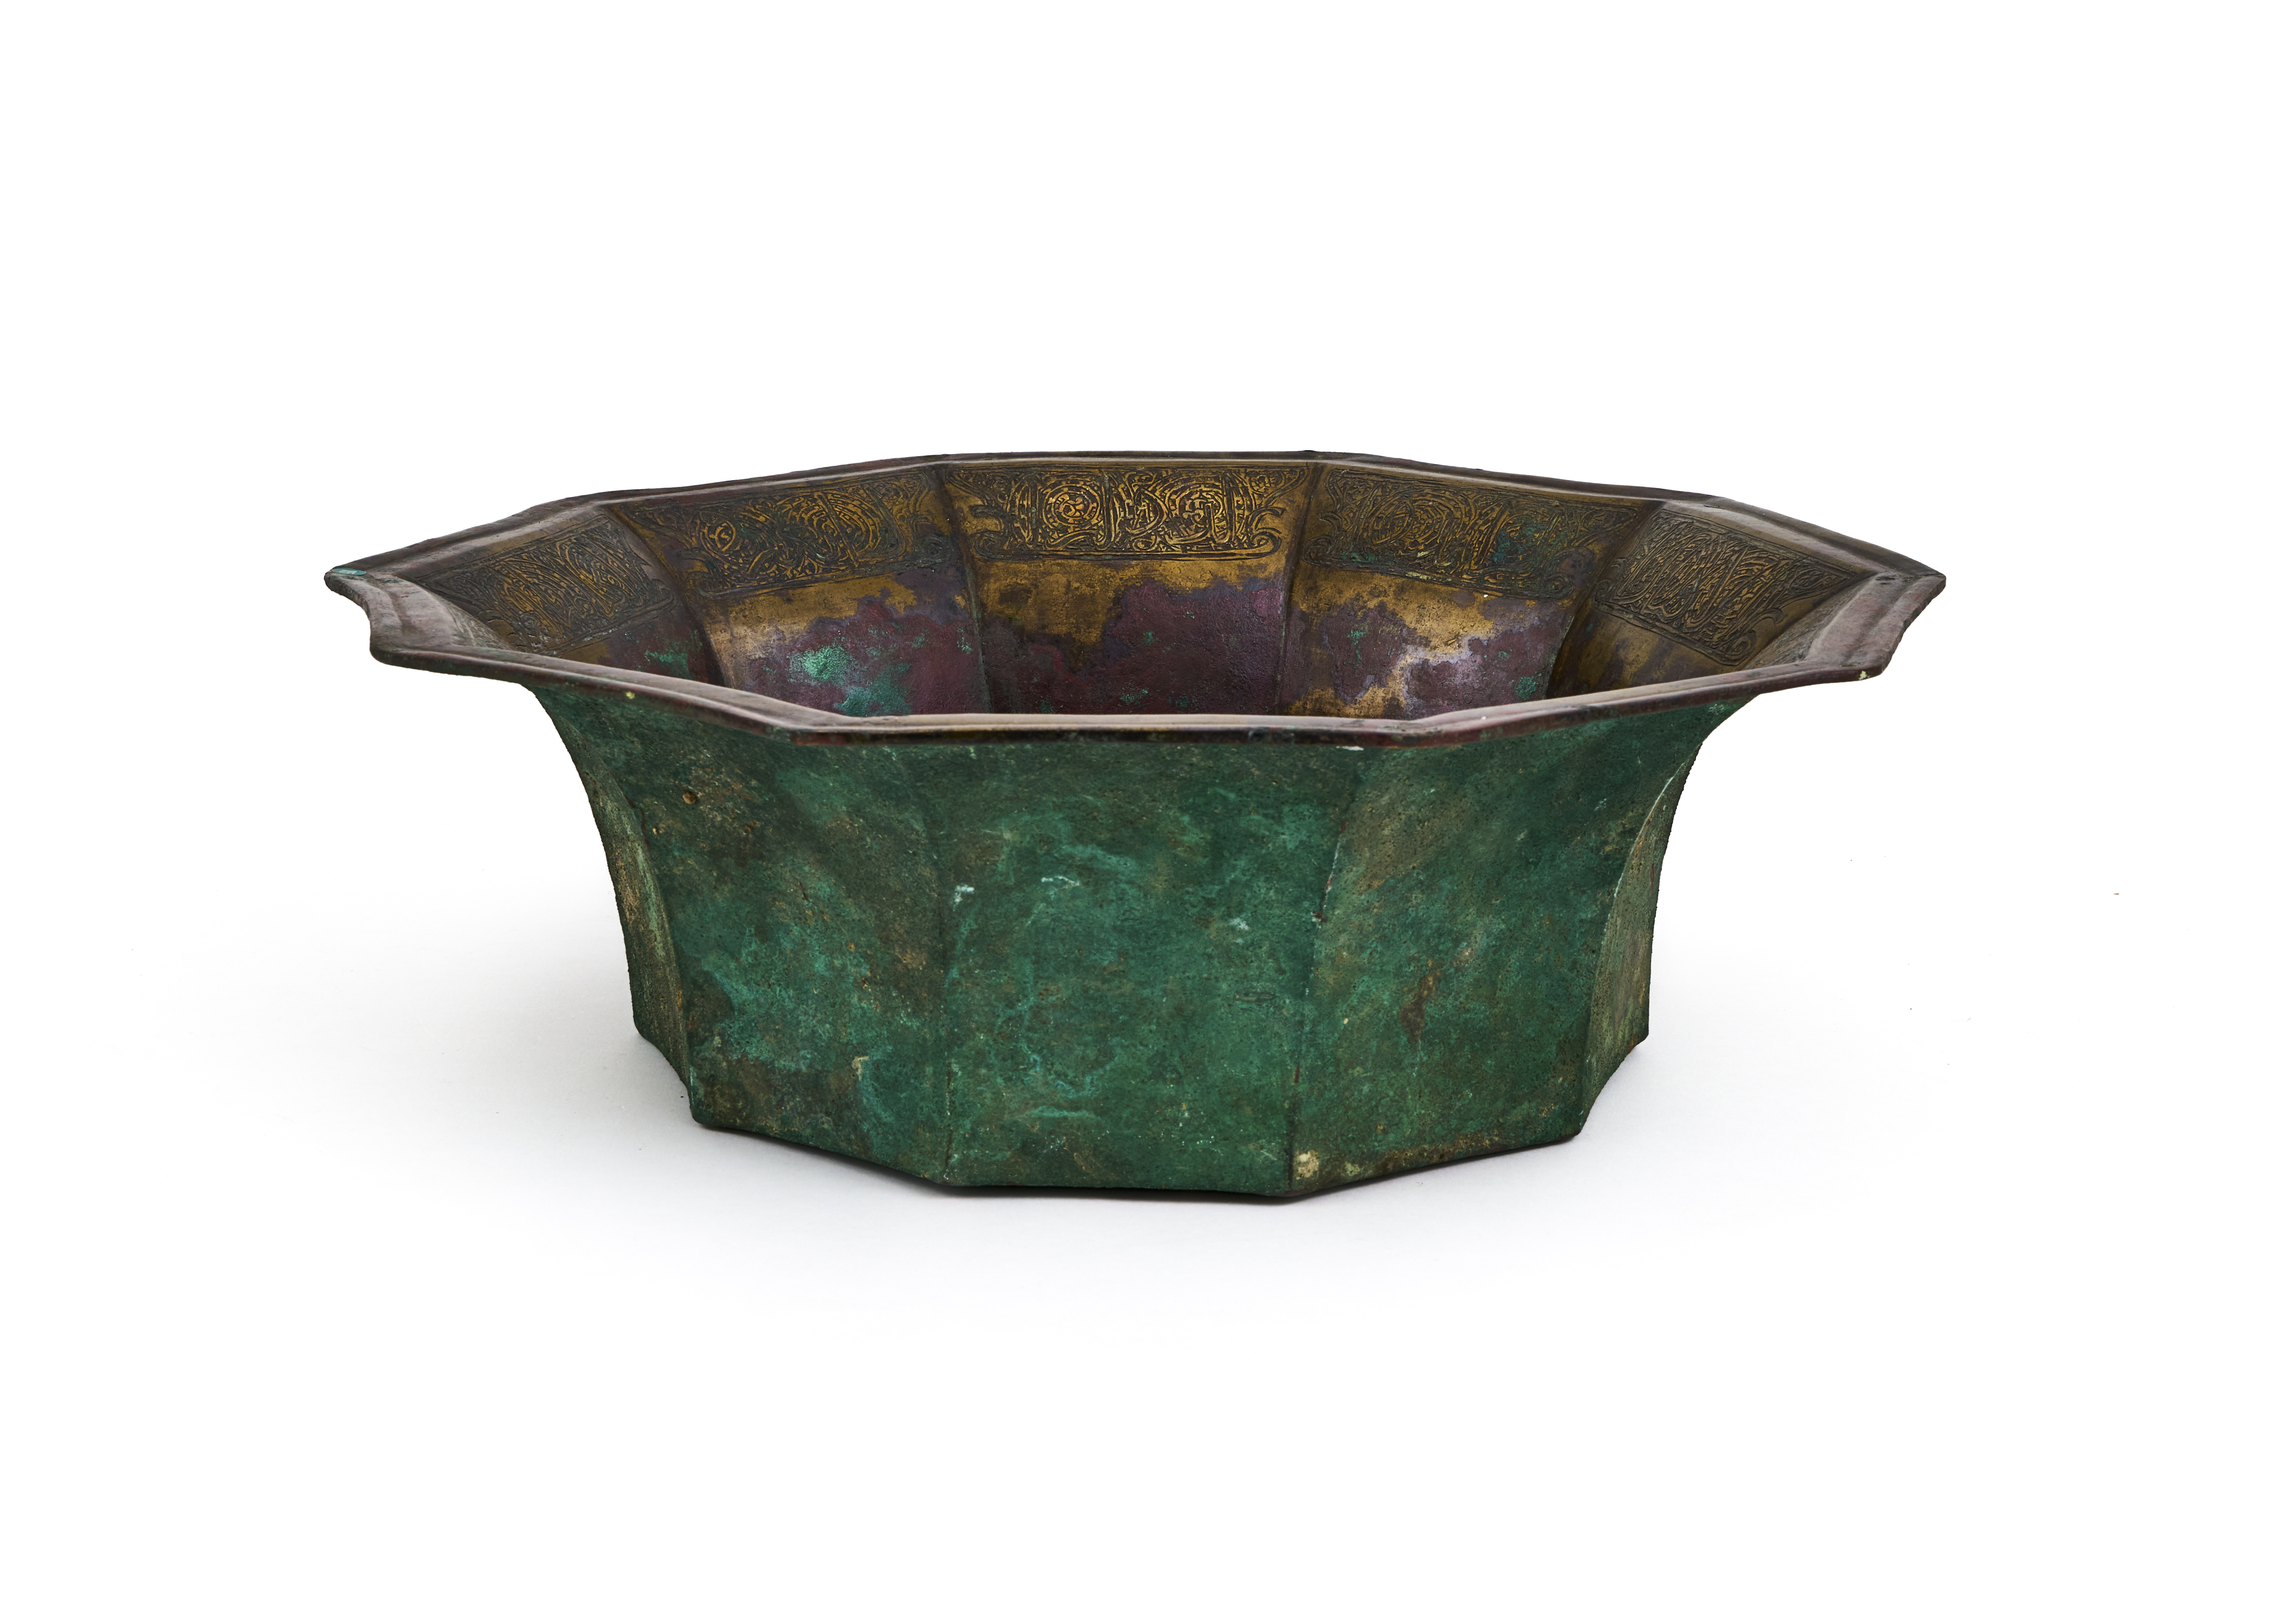 A LARGE KHORASSAN SILVER AND COPPER INLAID BRASS BASIN NORTH EAST IRAN, 12TH CENTURY - Image 3 of 4